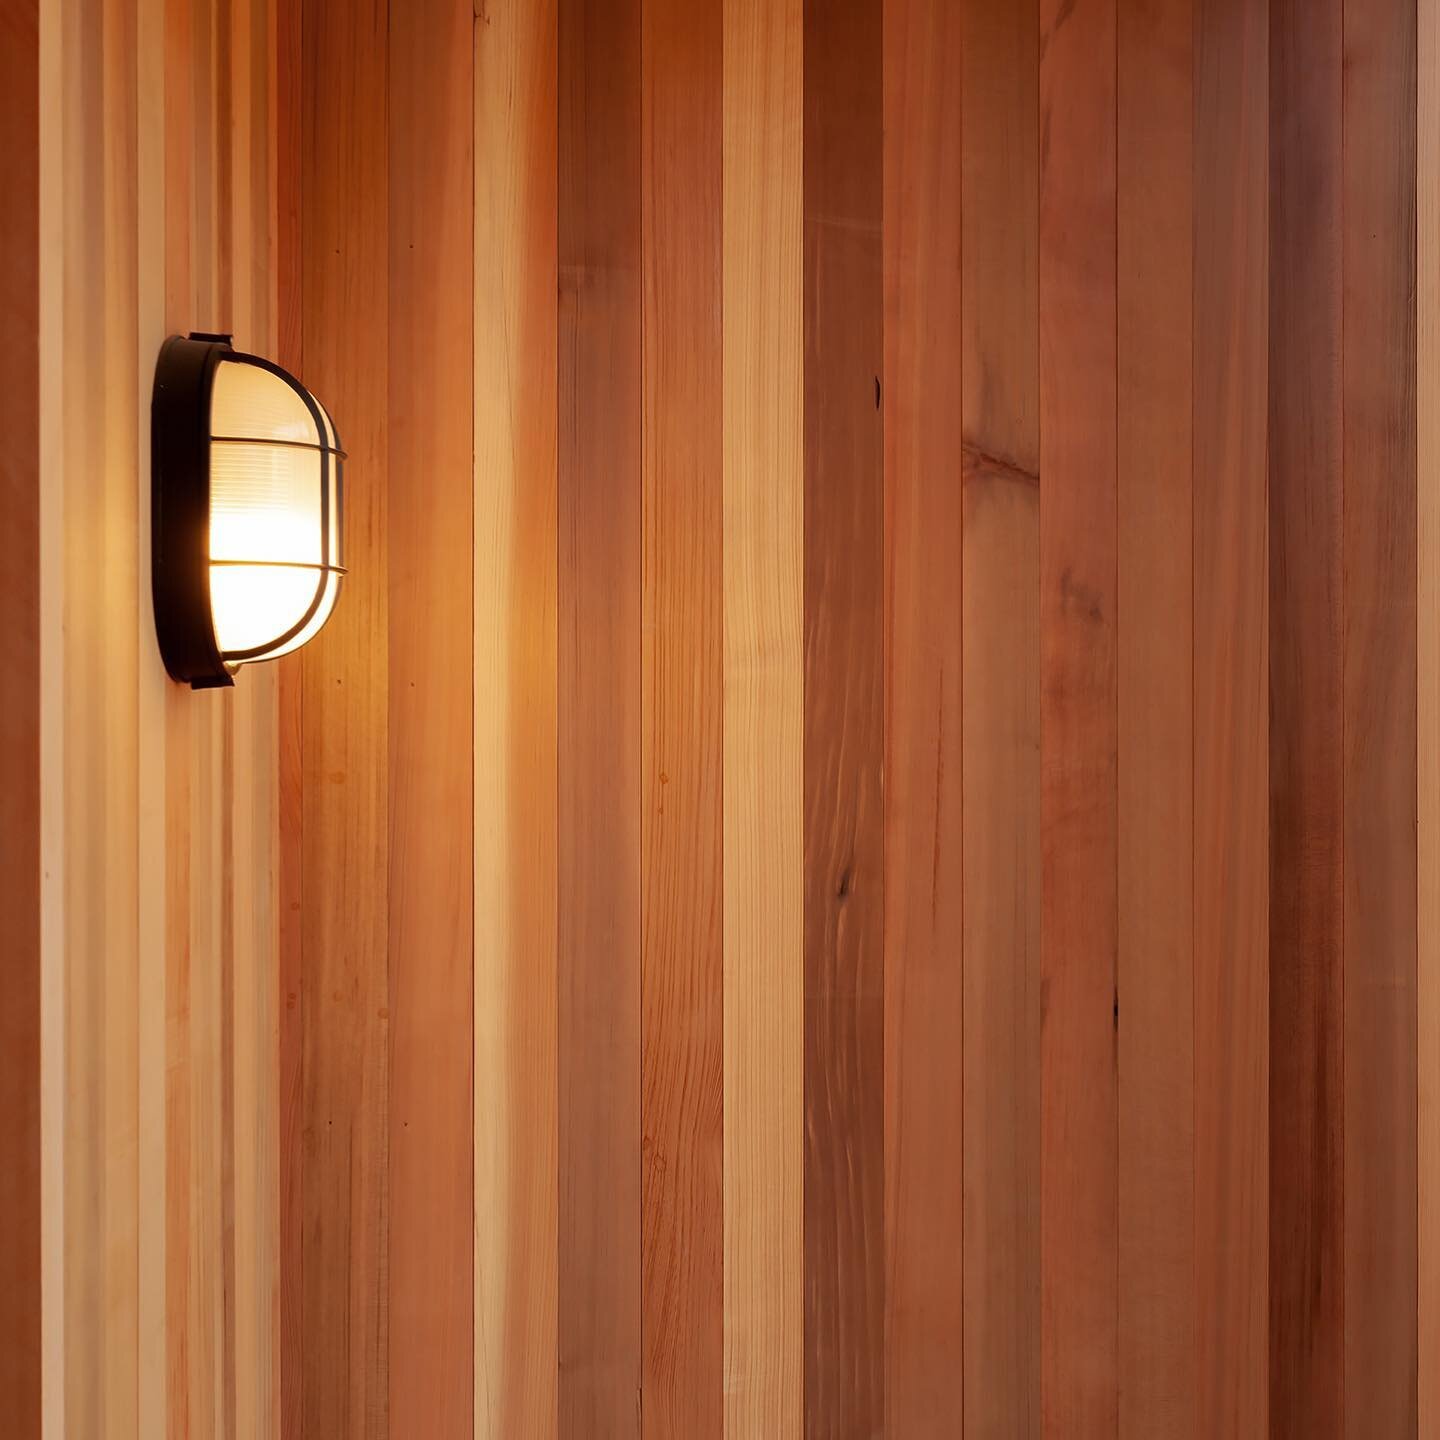 Nothing beats the warmth of natural wood inviting you into a home. Natural western red cedar for this entry.